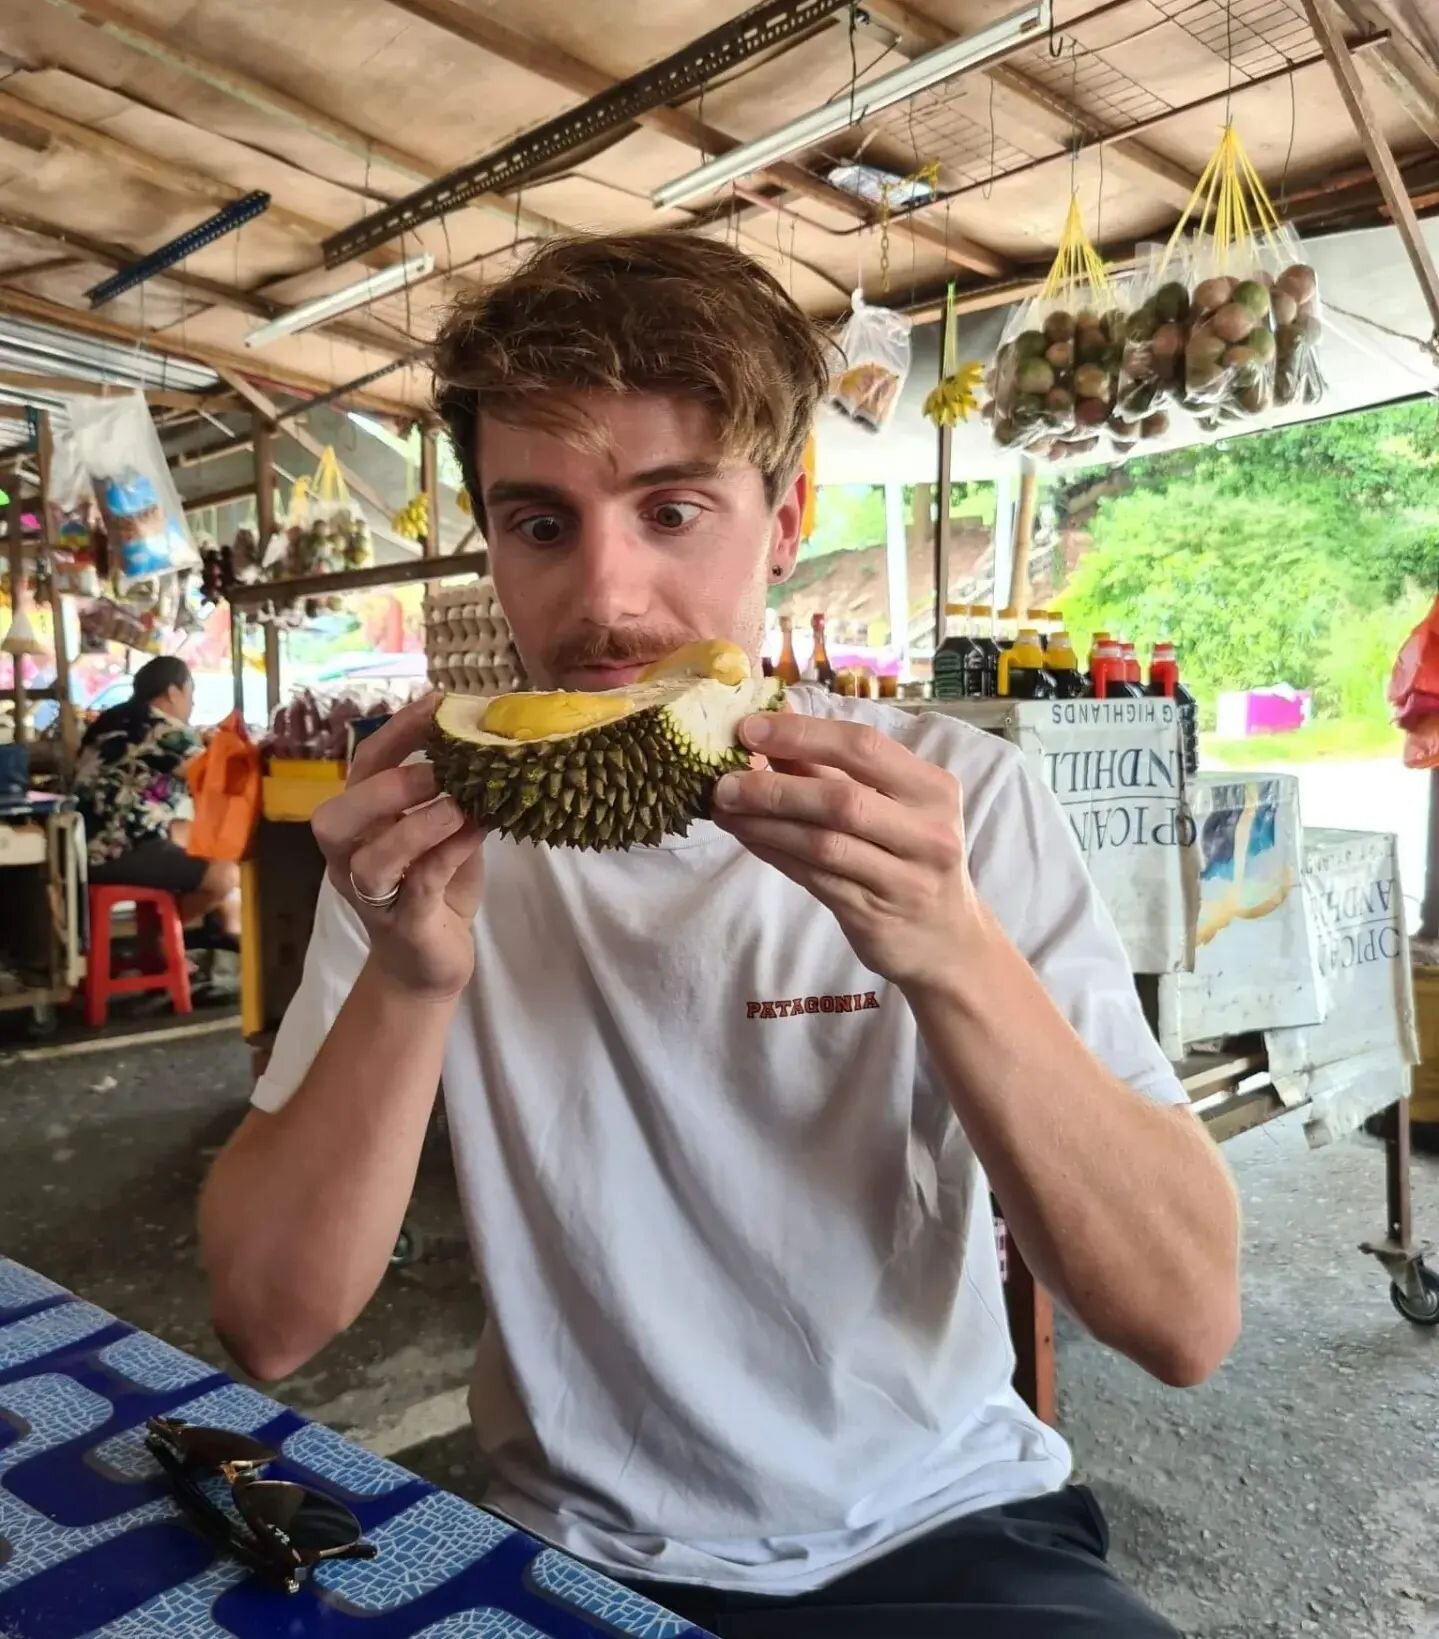 5 days in Maslaysia and 1000% humidity

(Yes enjoying durian IS my entire personality thx for asking)